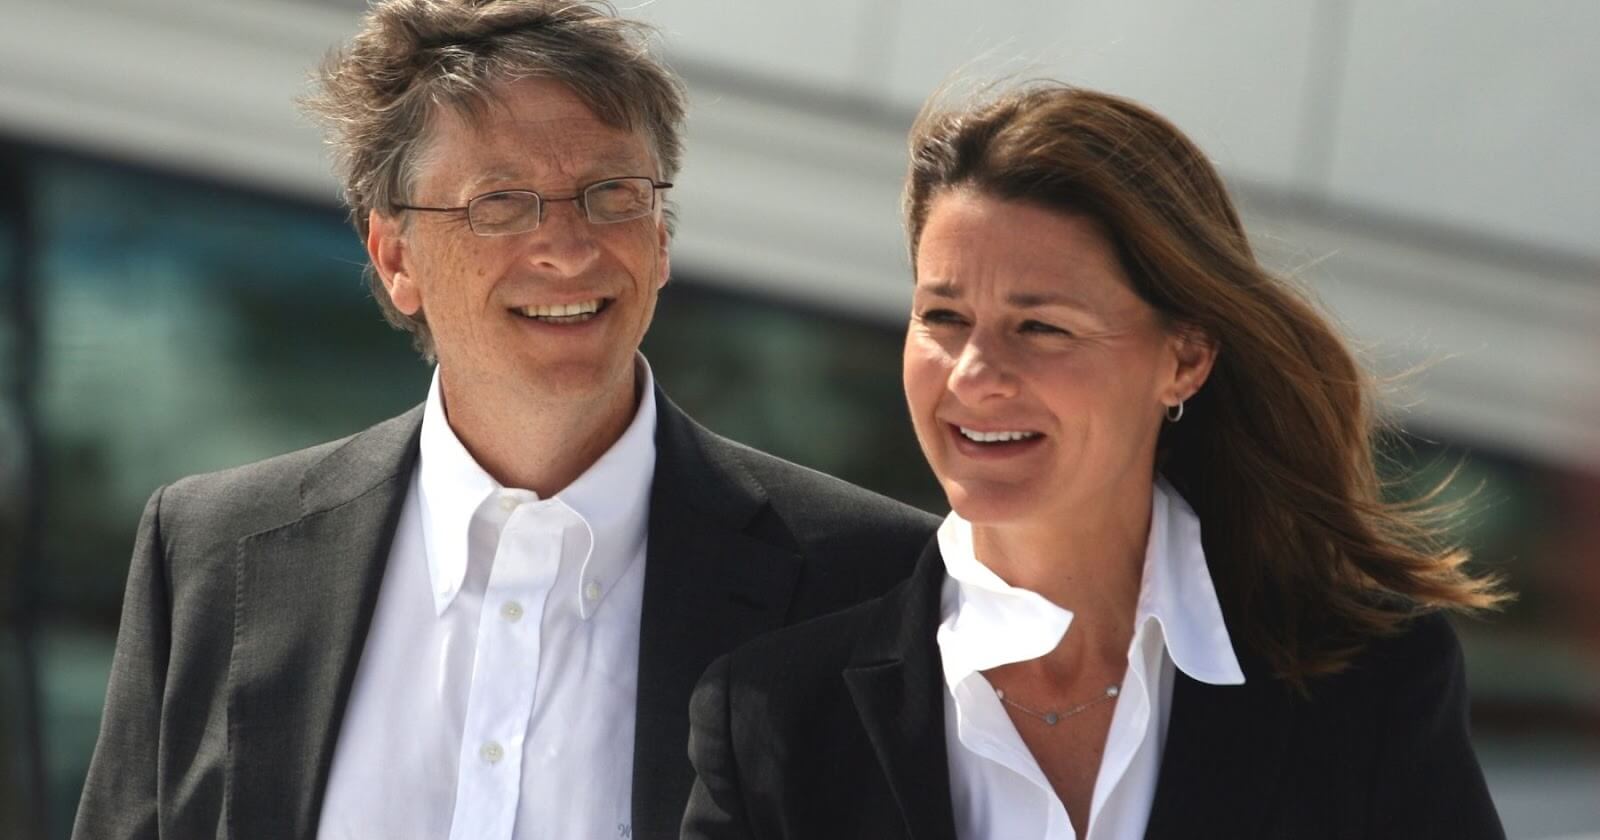 Bill & Melinda Gates Foundation gives grants to journalists to run pro-abortion articles in European media outlets